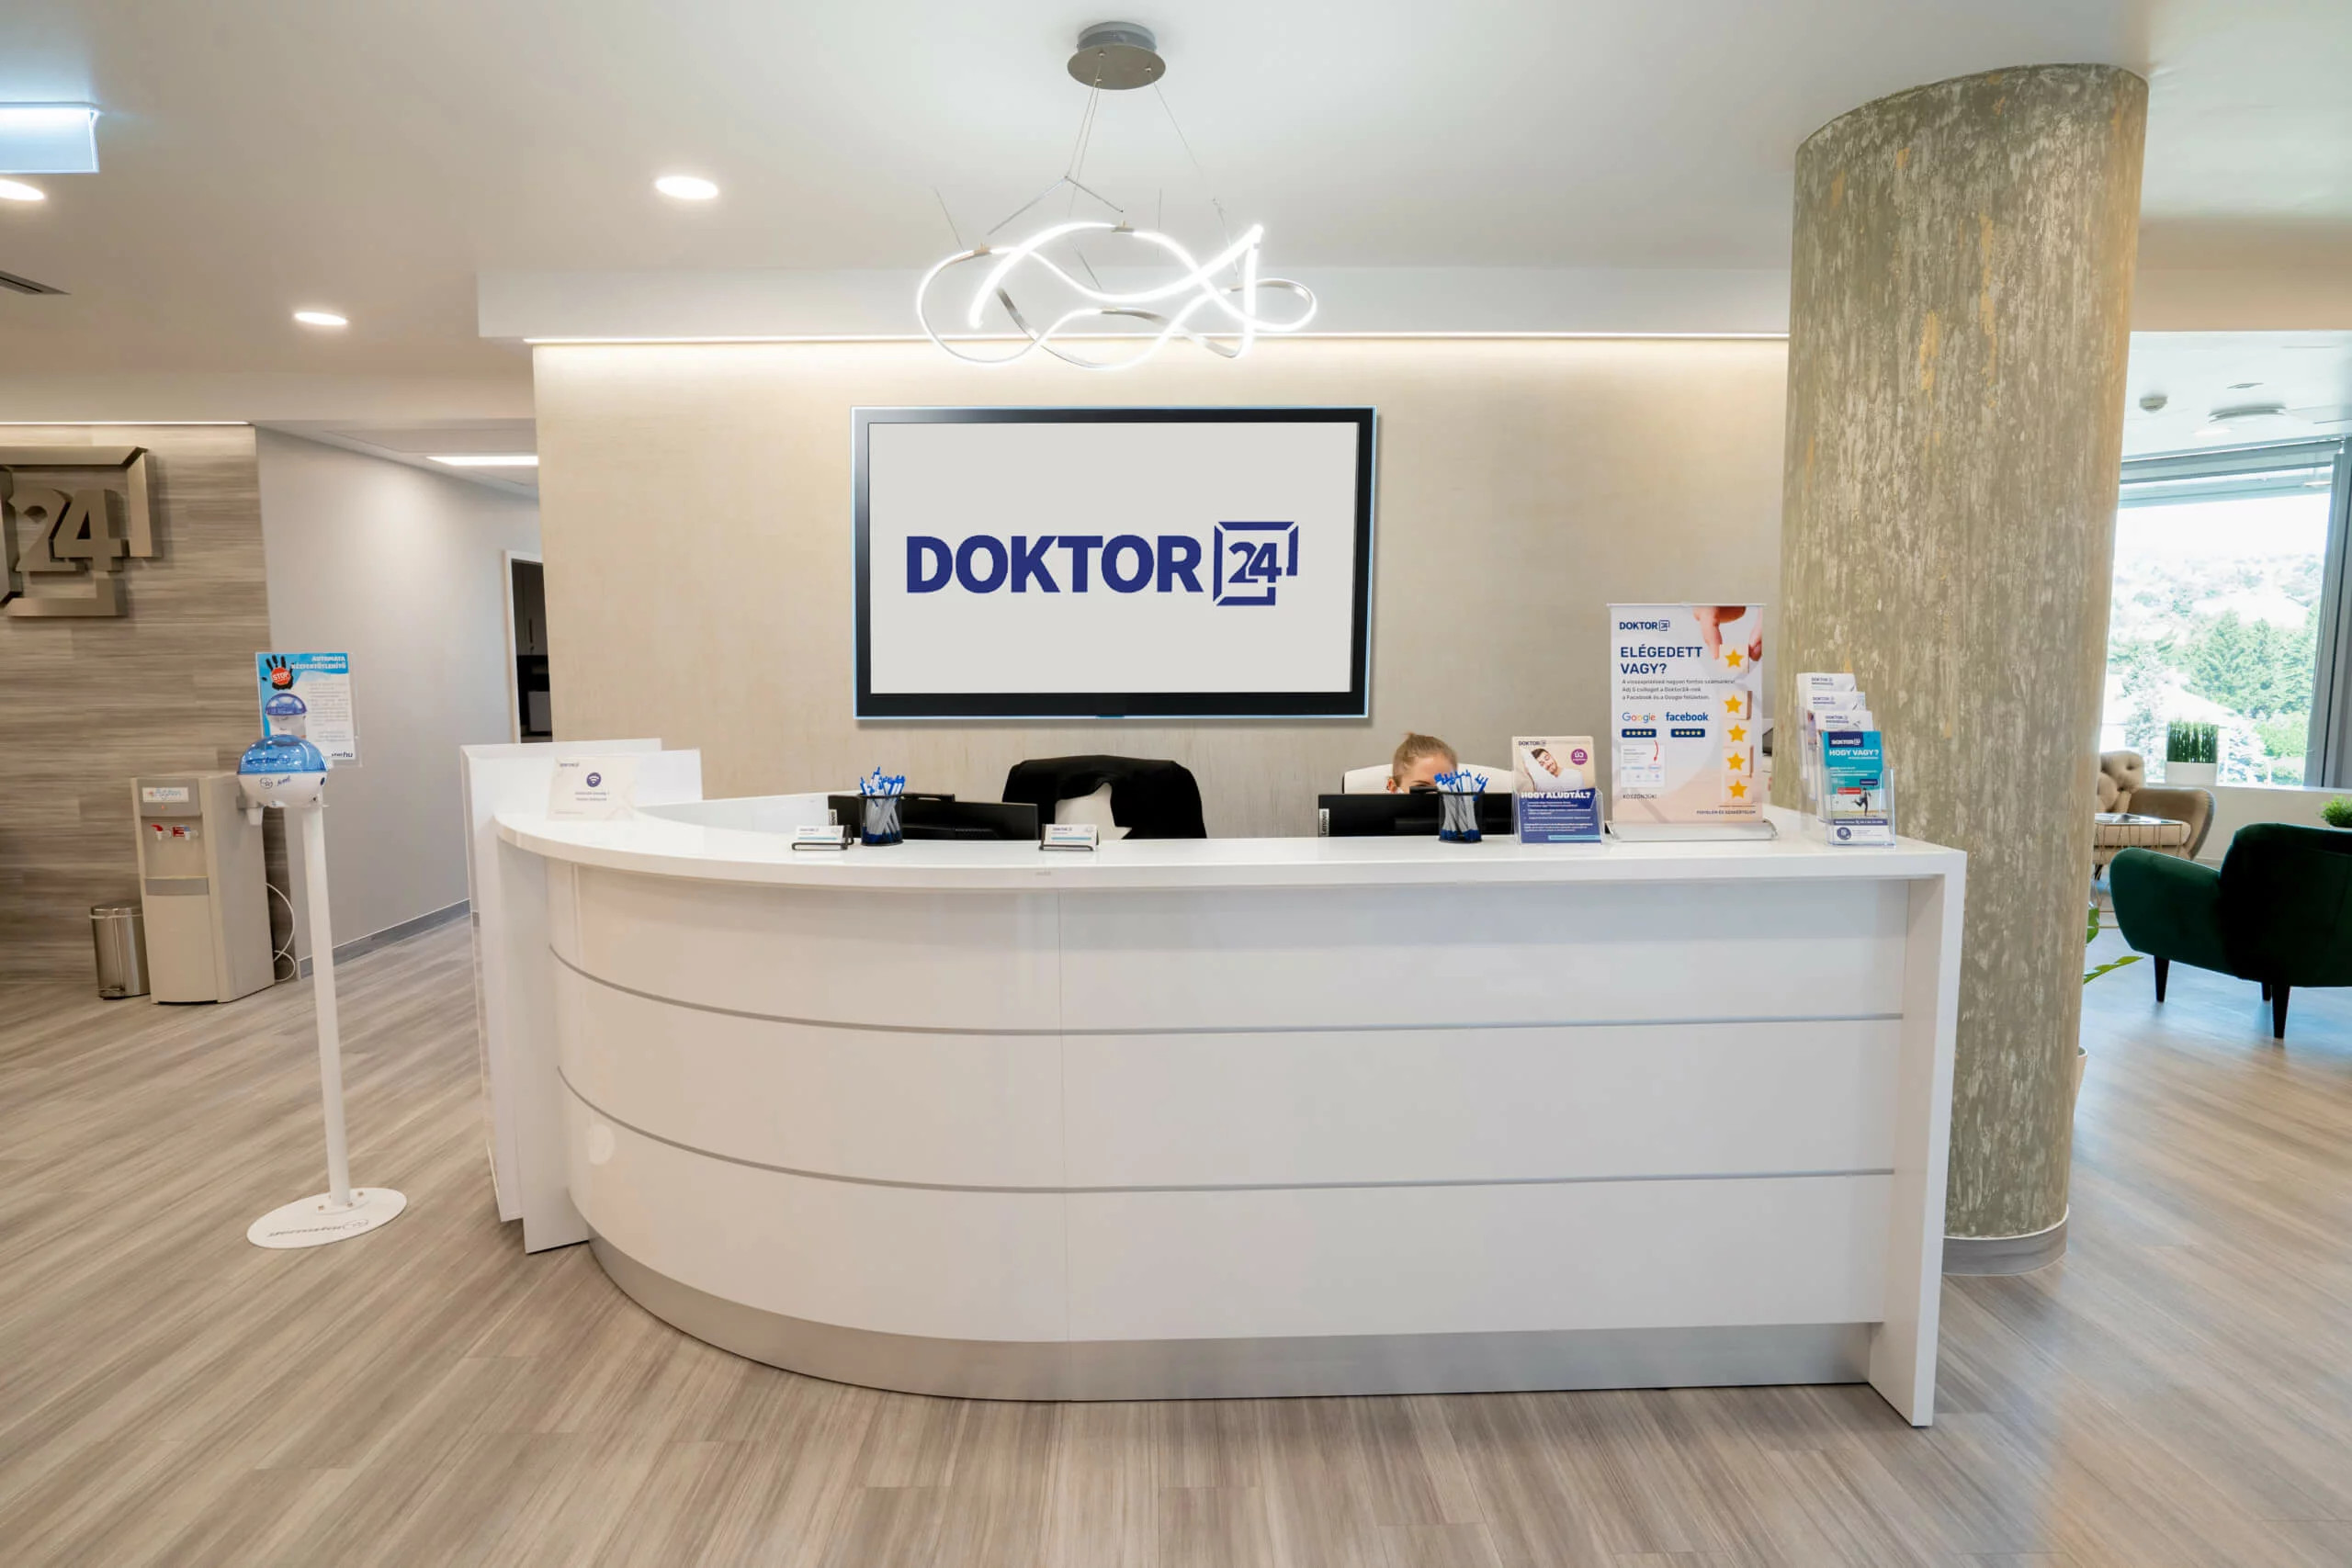 Complex Surgery & Intensive Care Launched at Doktor24